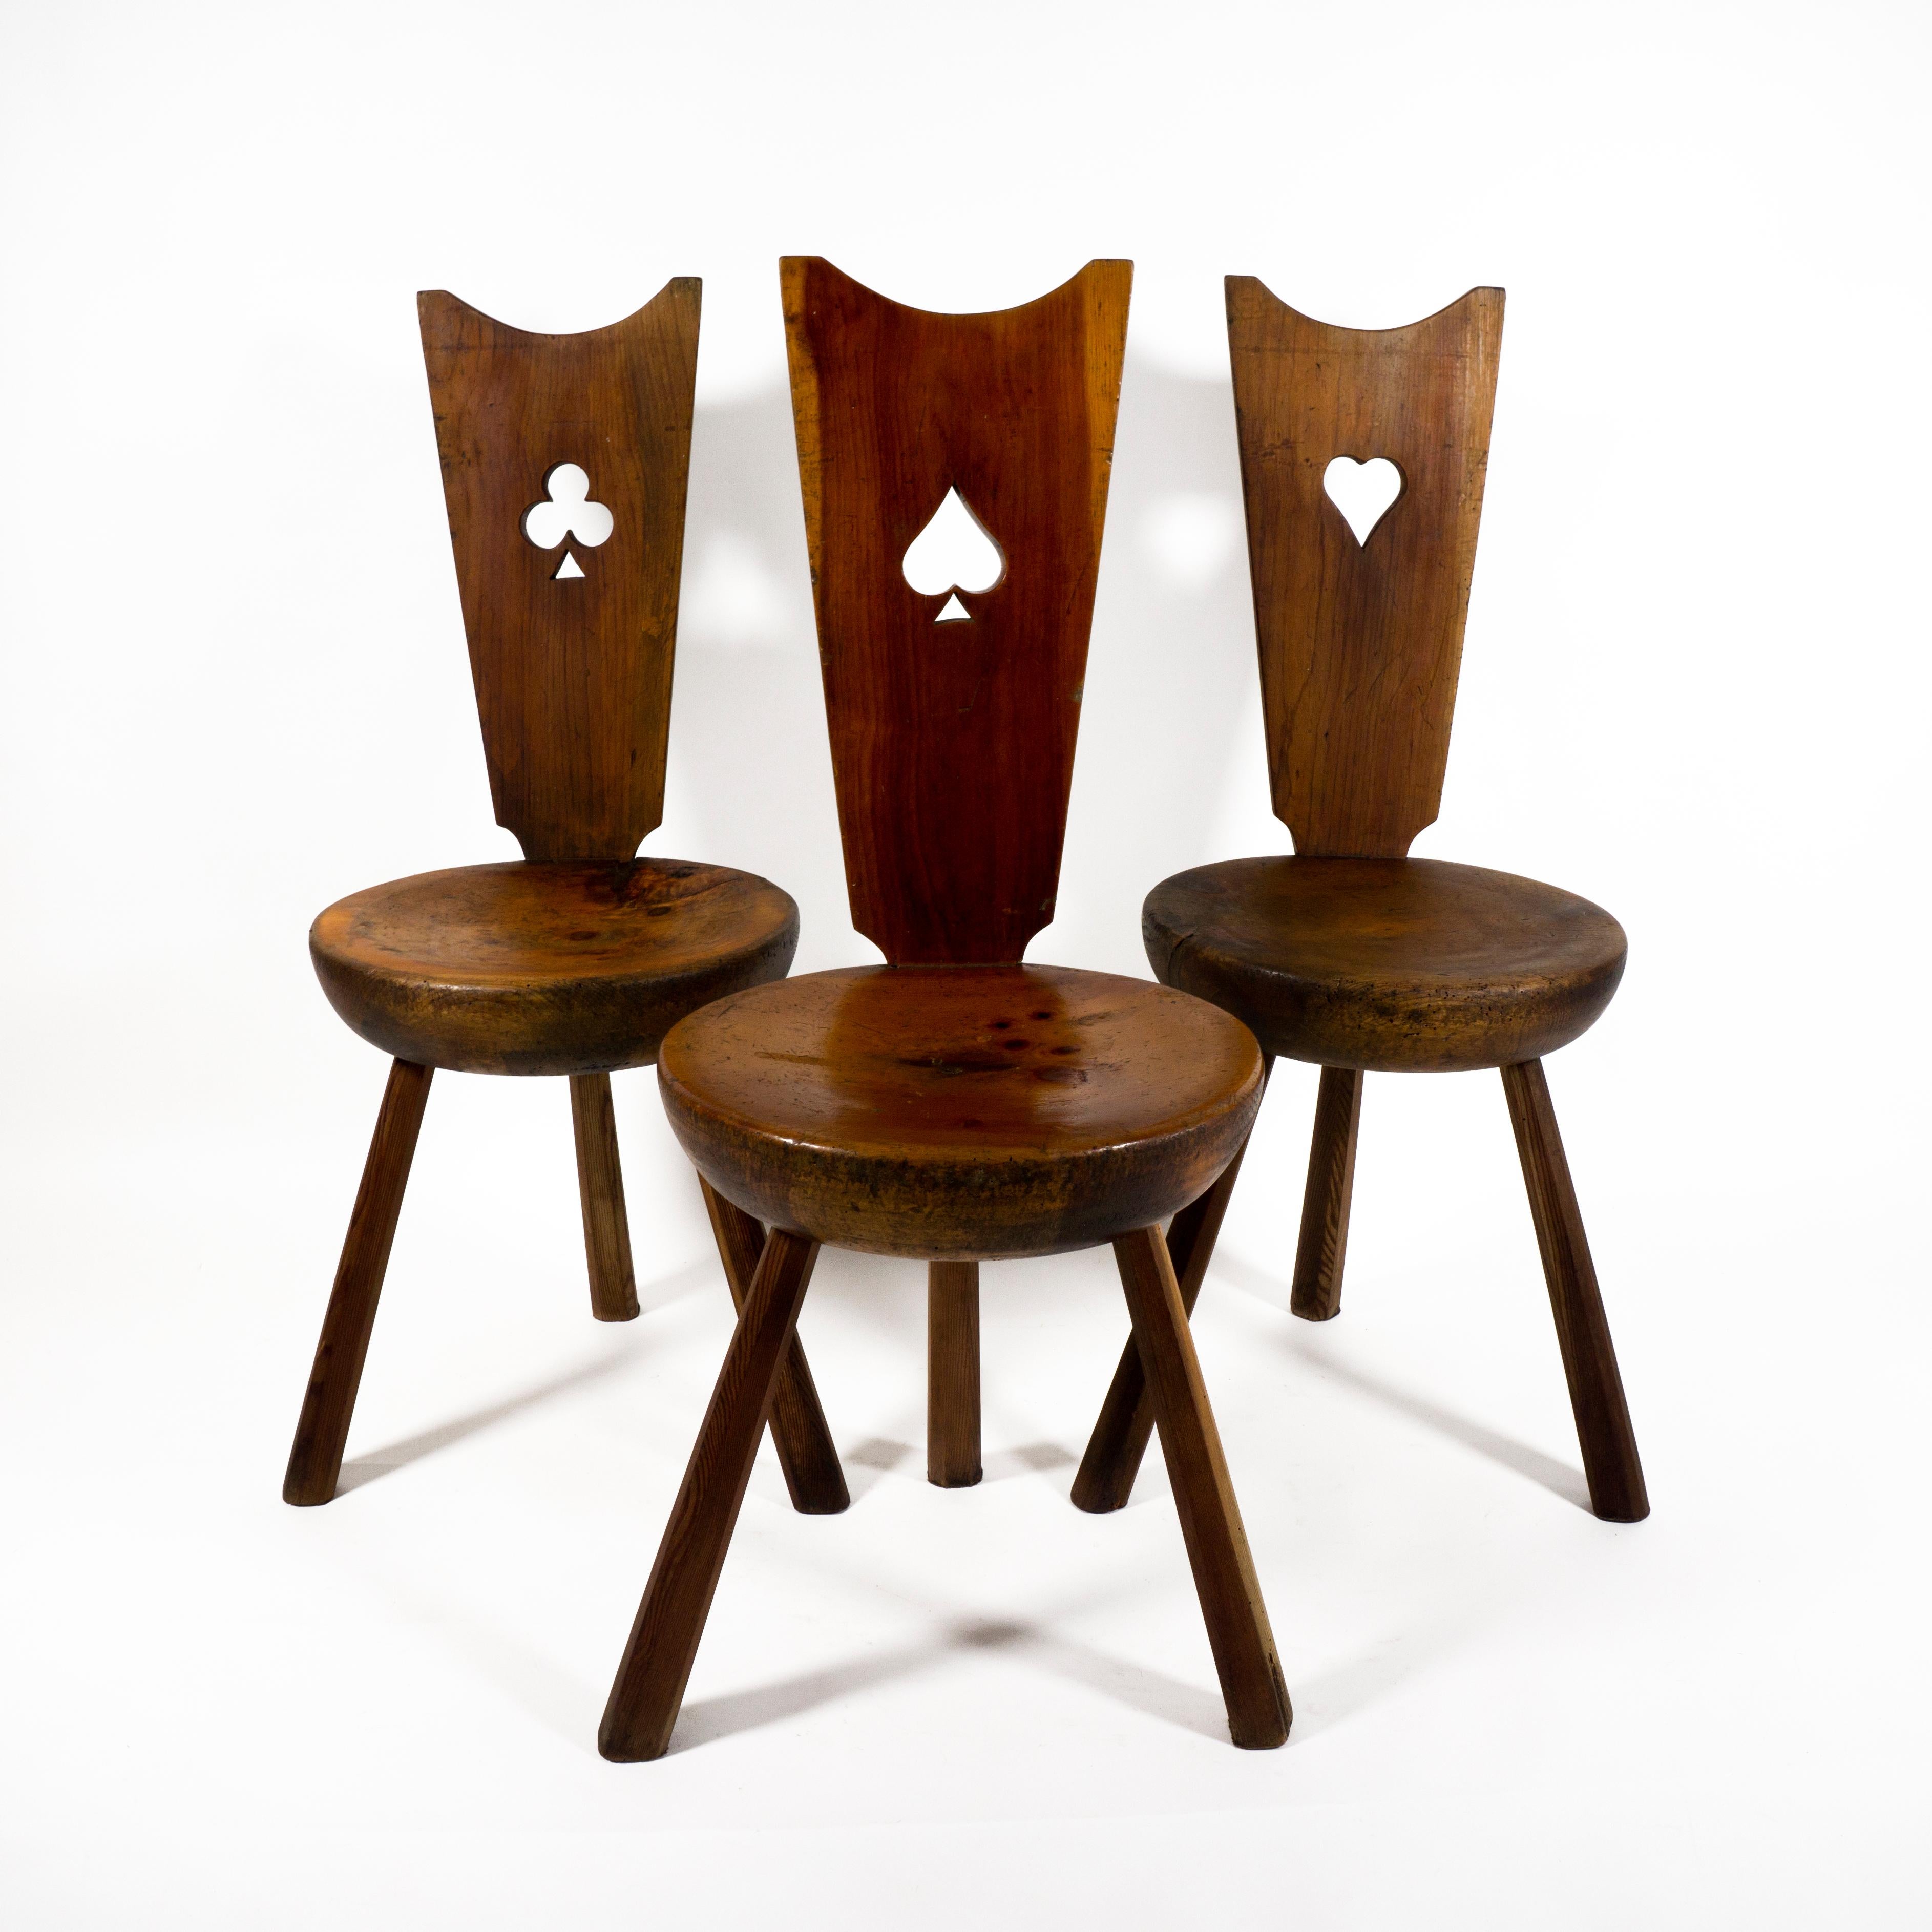 Beautiful set of 3 Italian solid wood tripod chairs with wonderful patina - original Mid Century.
Each chair is very robust and stable. Not wobbly and built to last.
The playing card chairs (Club, Spade & Heart) are ready to use.
Each chair varies